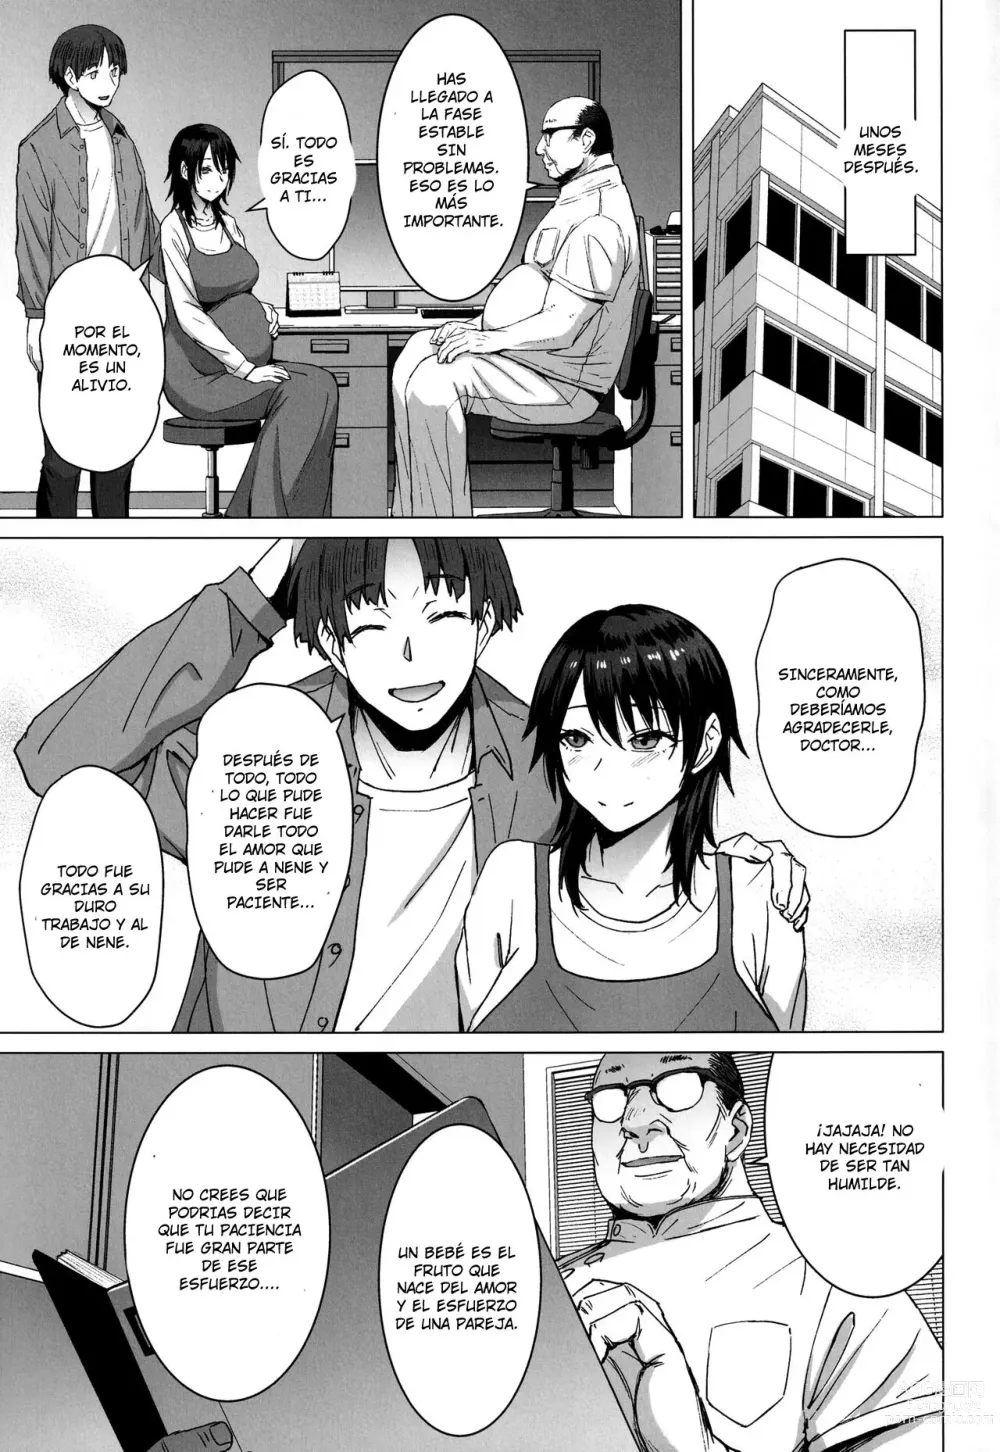 Page 36 of doujinshi Ninkatsu Hitozuma Collection - the collection of married women undergoing infertility treatment.